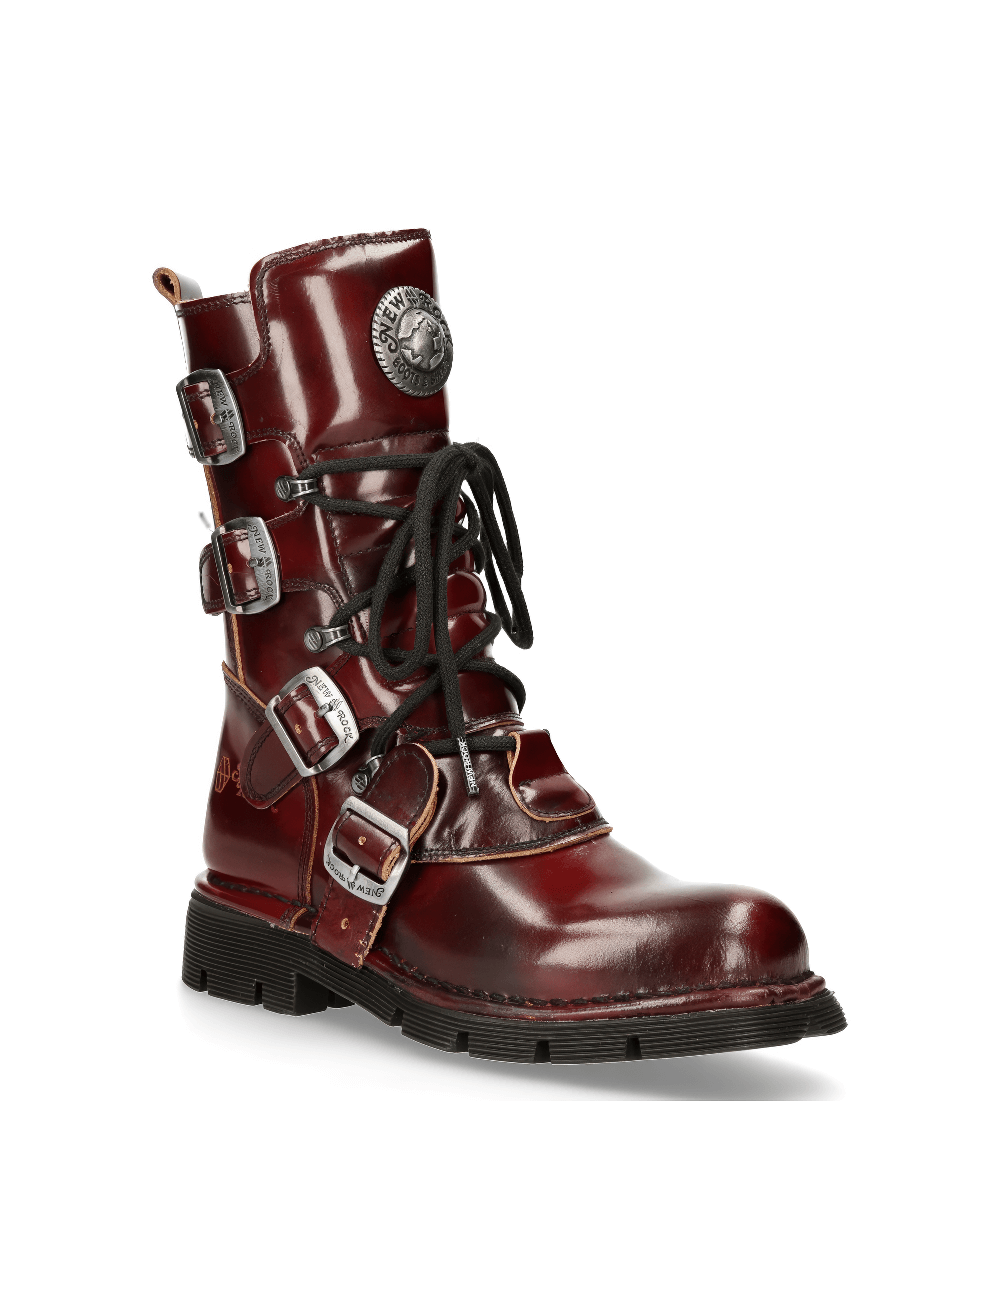 NEW ROCK Unisex Wine Red Leather Urban Combat Boots